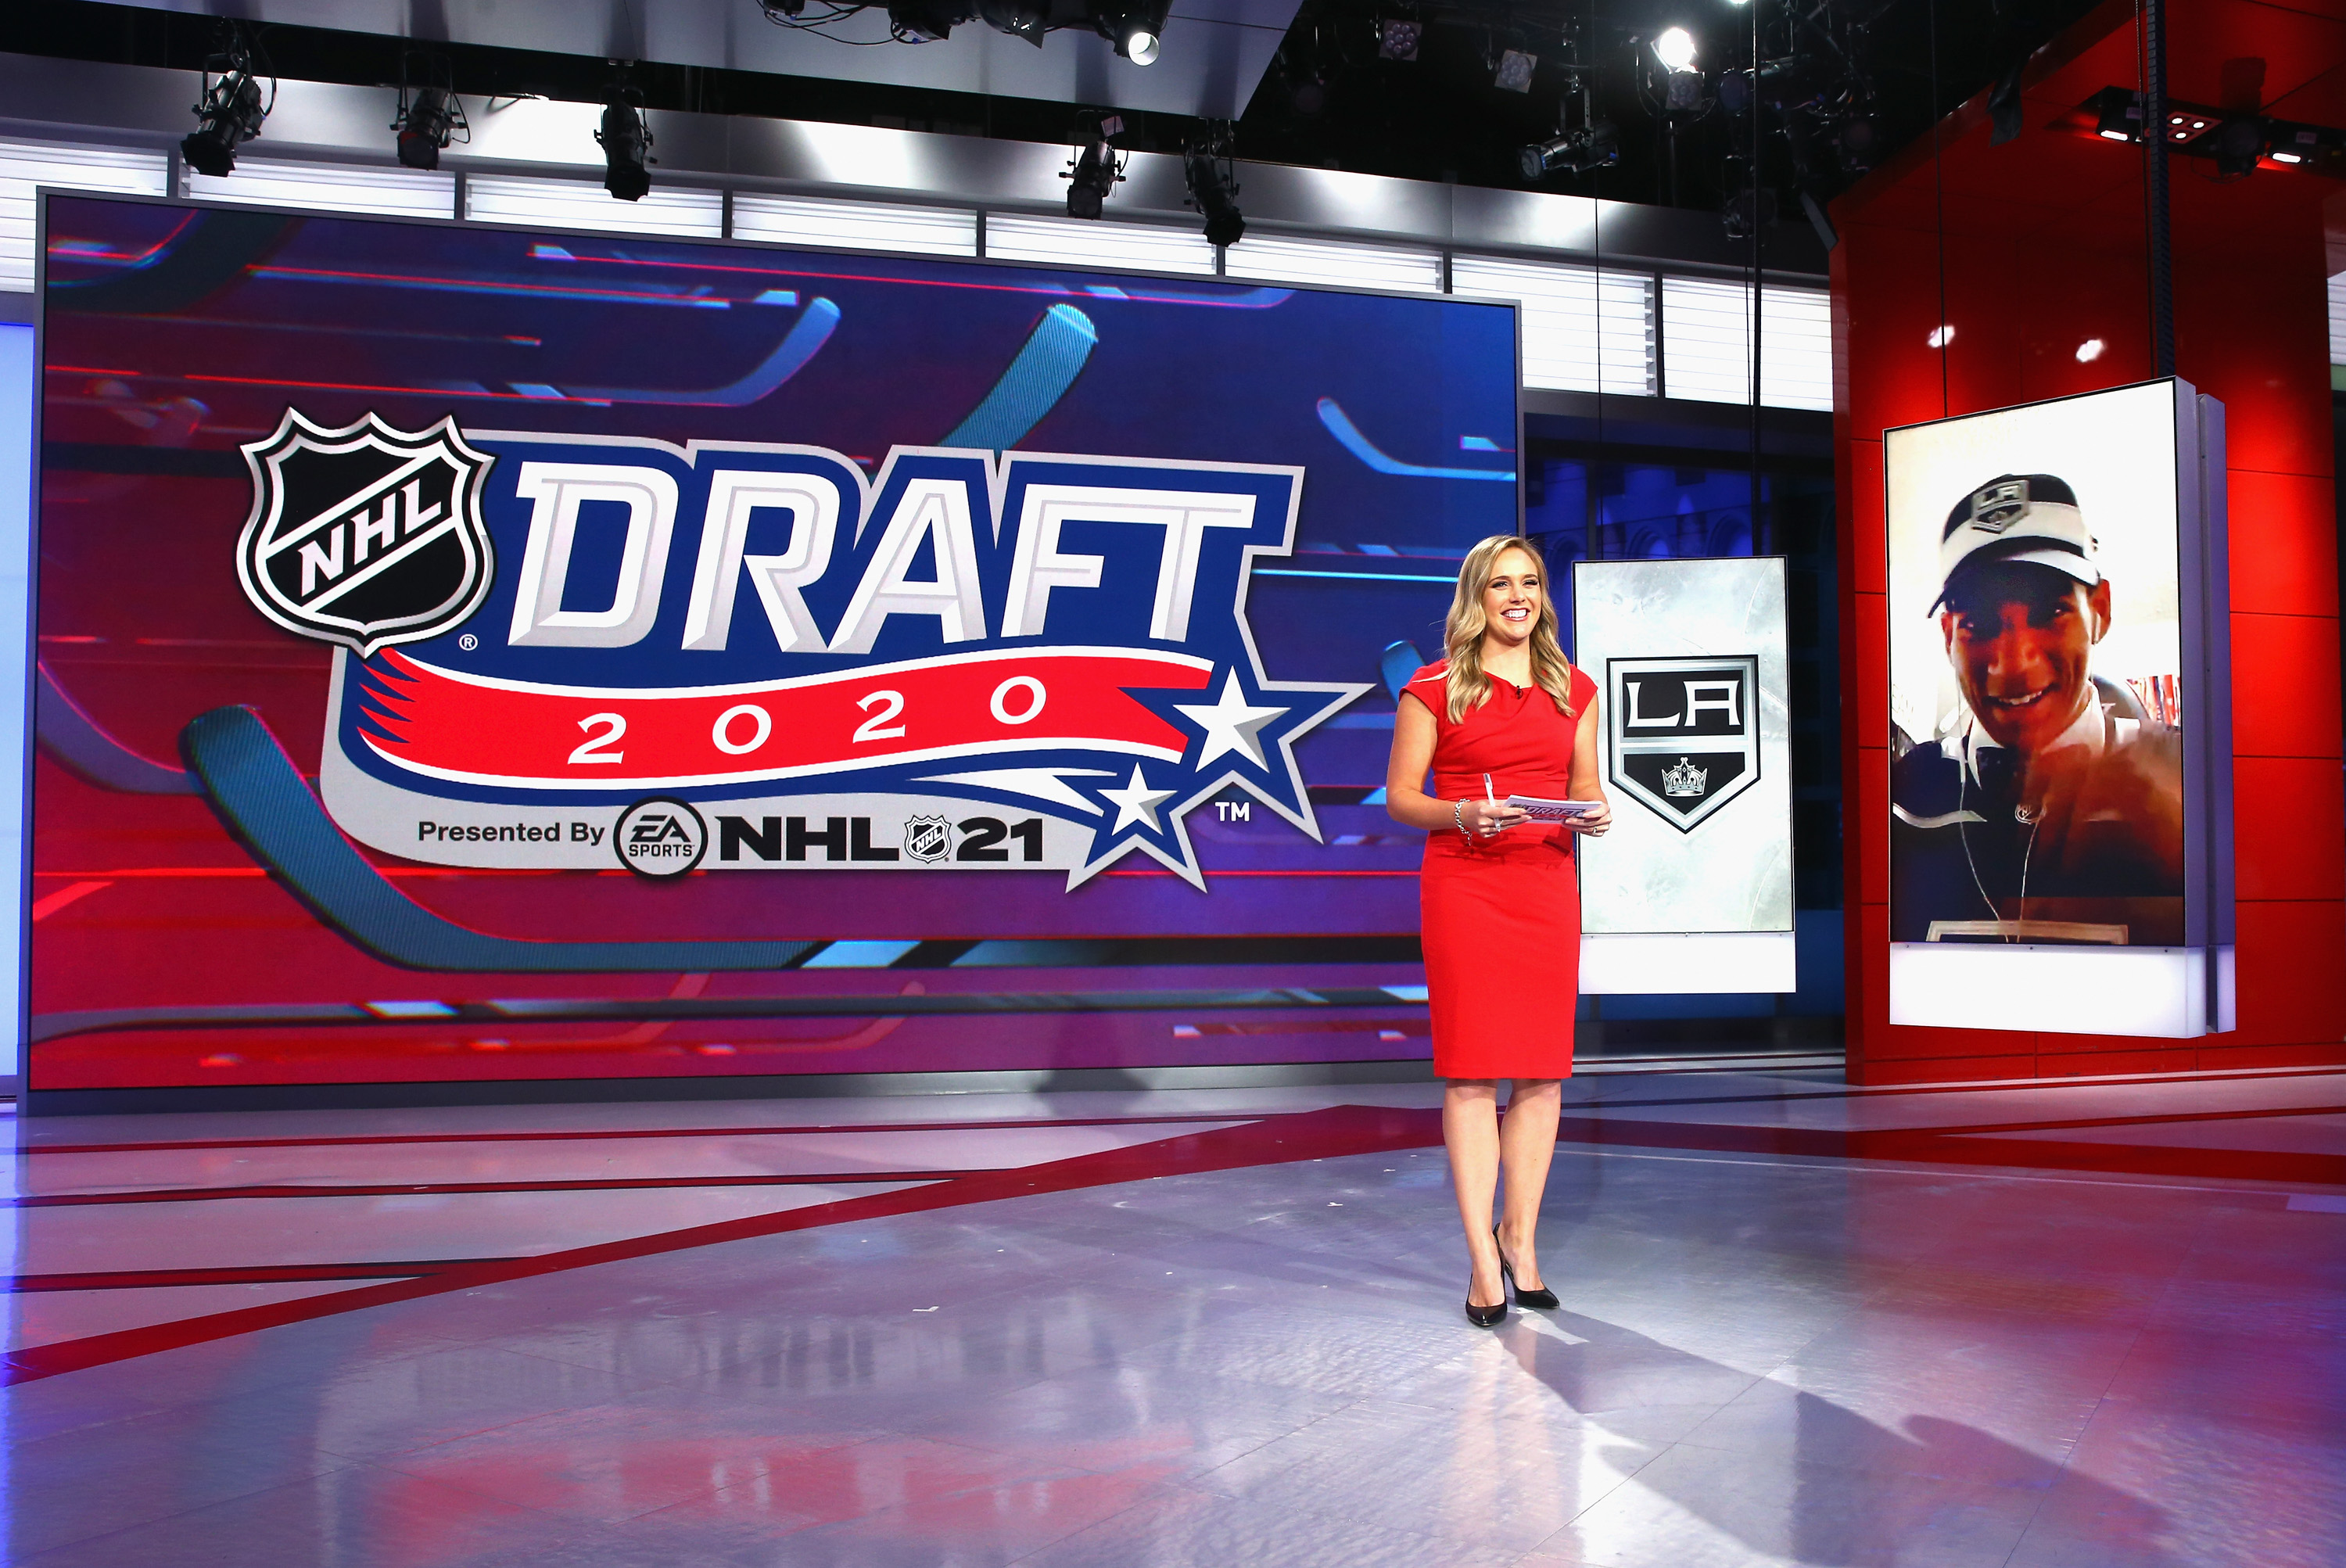 SECAUCUS, NEW JERSEY - OCTOBER 06: Jamie Hersch of the NHL Network interviews Quinton Byfield of Sudbury of the OHL after his selection by the Los Angeles Kings in the 2020 National Hockey League Draft at the NHL Network Studio on October 06, 2020 in Secaucus, New Jersey.